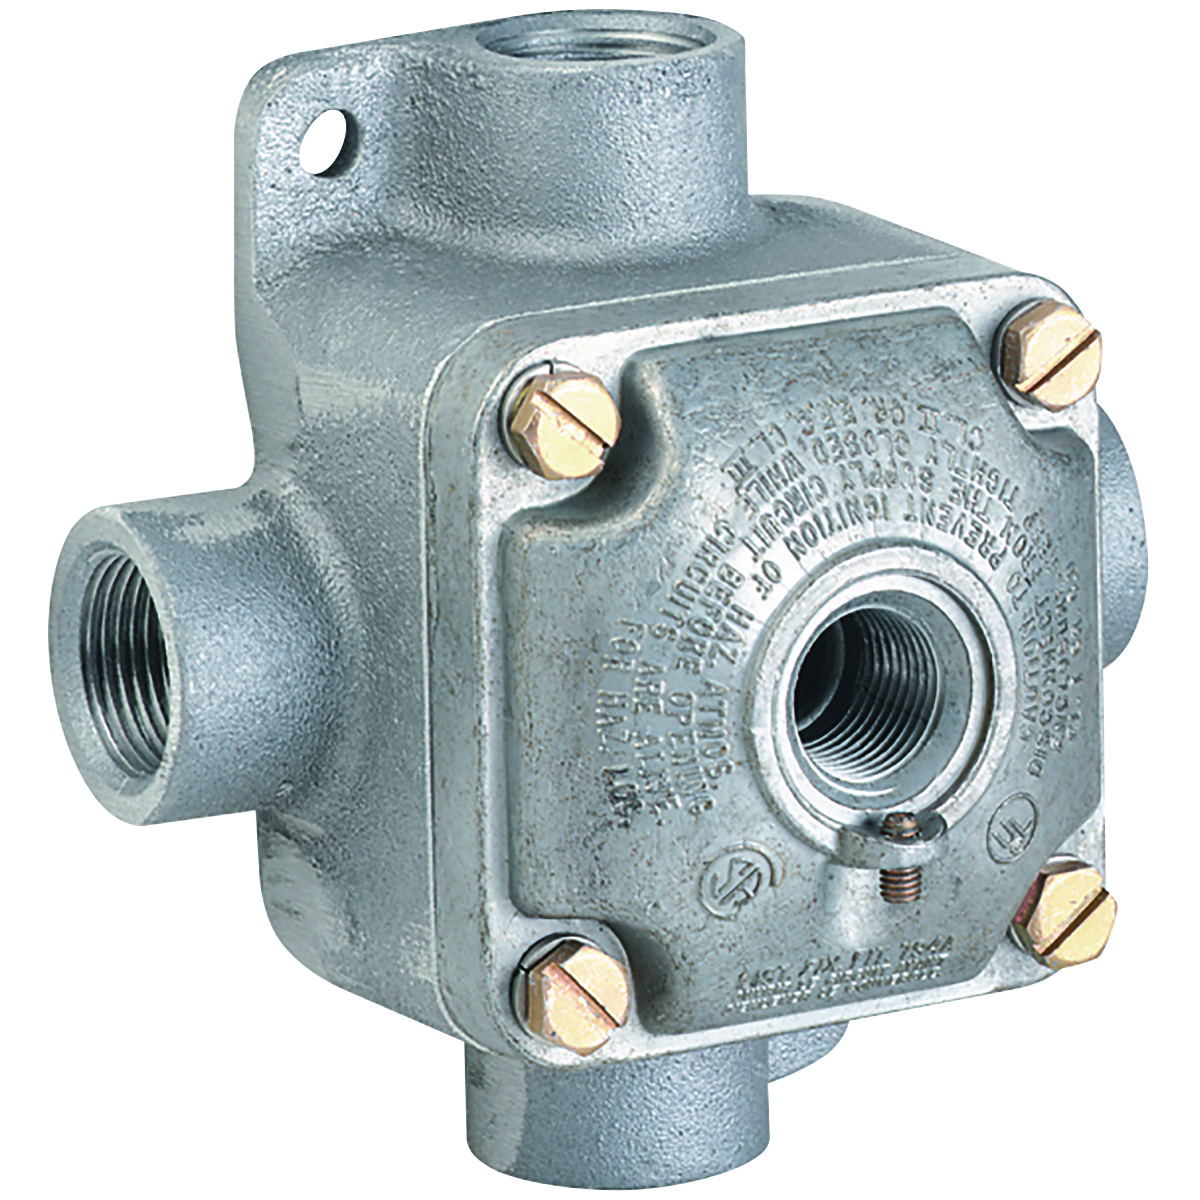 JL SERIES - ALUMINUM OUTLET BODY WITH COVER - WITH HUB COVER - BOX TYPEX - BOX HUB SIZE 3/4 INCH - COVER HUB SIZE 1/2 INCH